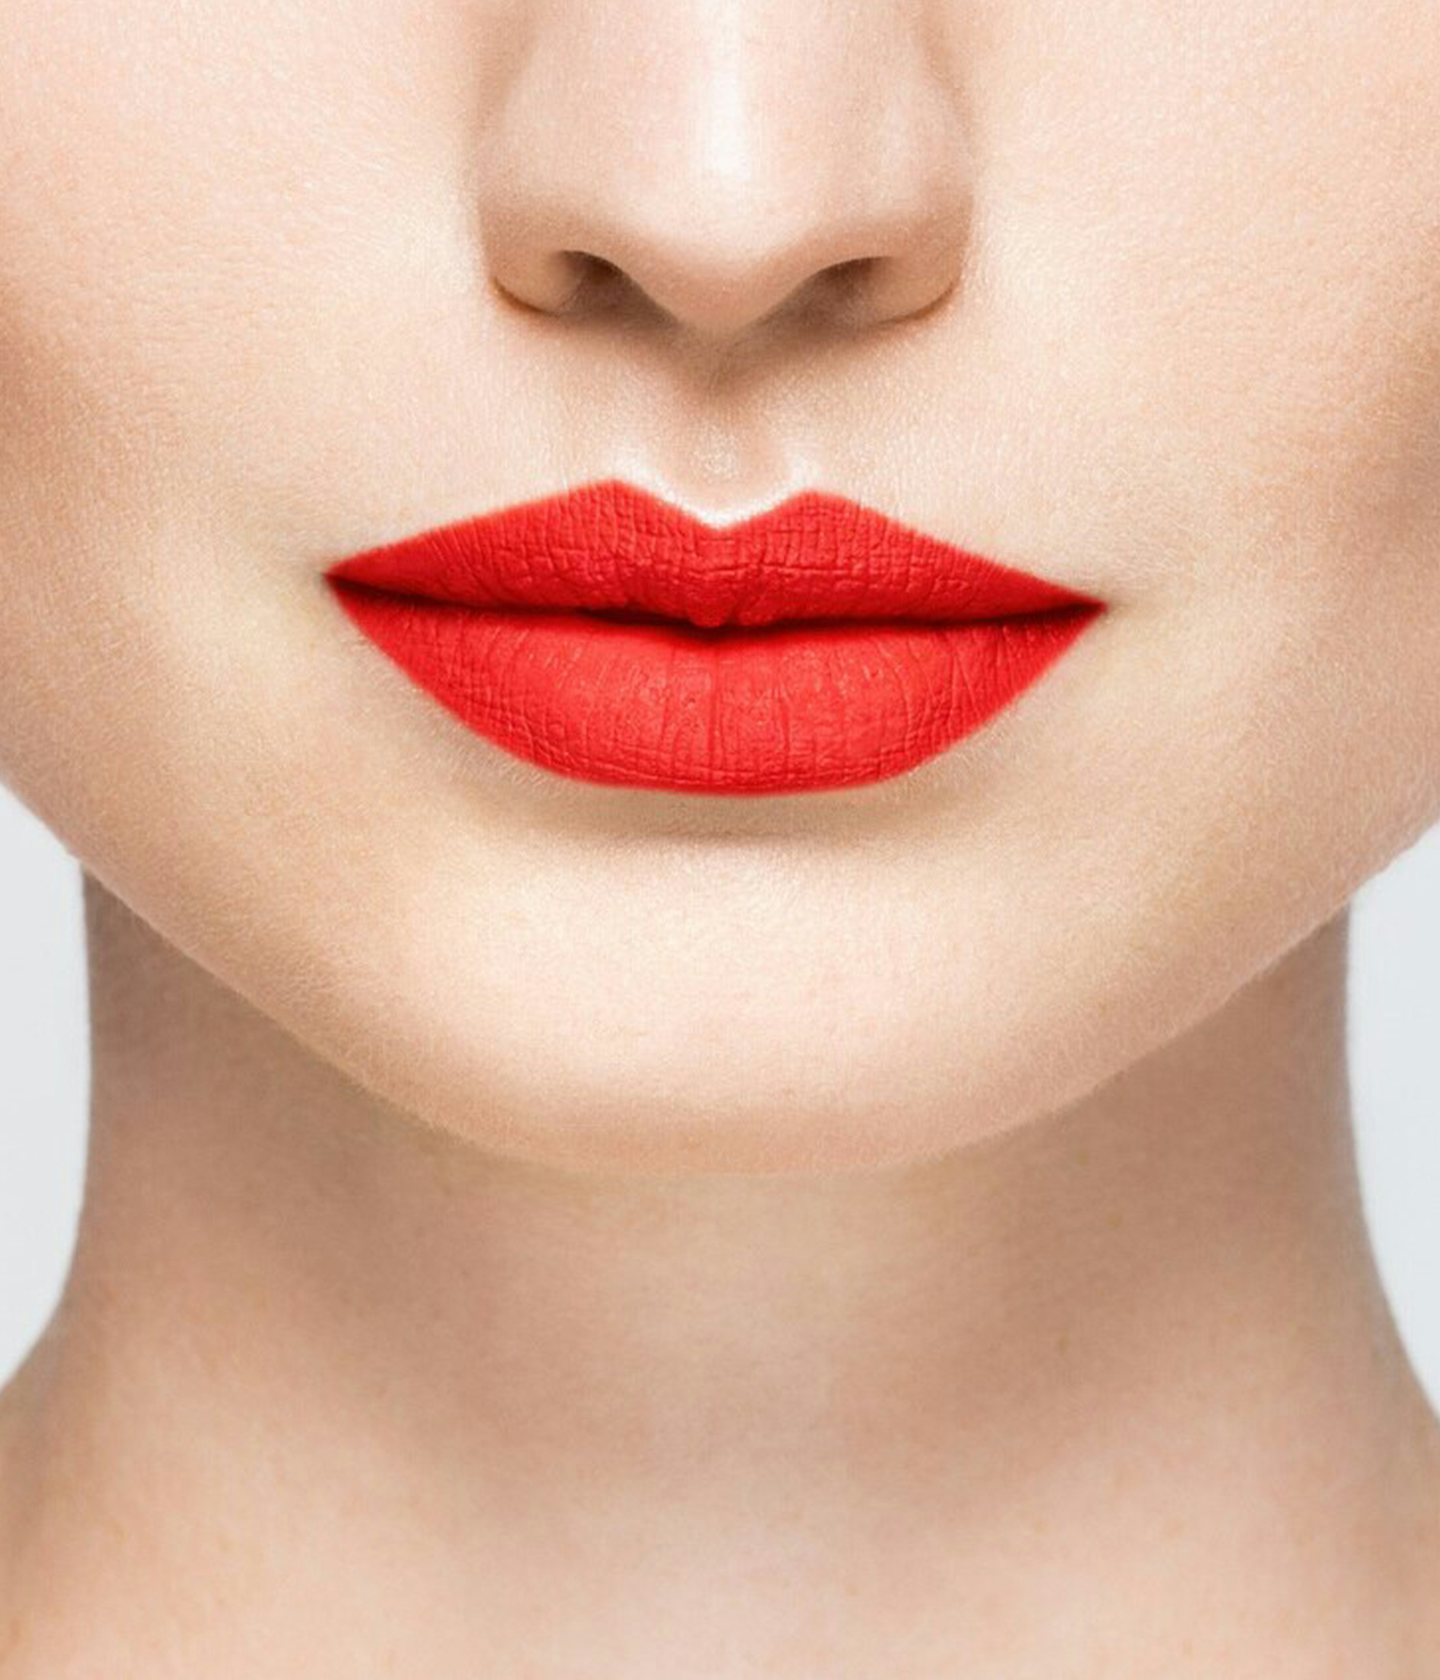 La bouche rouge Neon Gied lipstick shade on the lips of a fair skin model